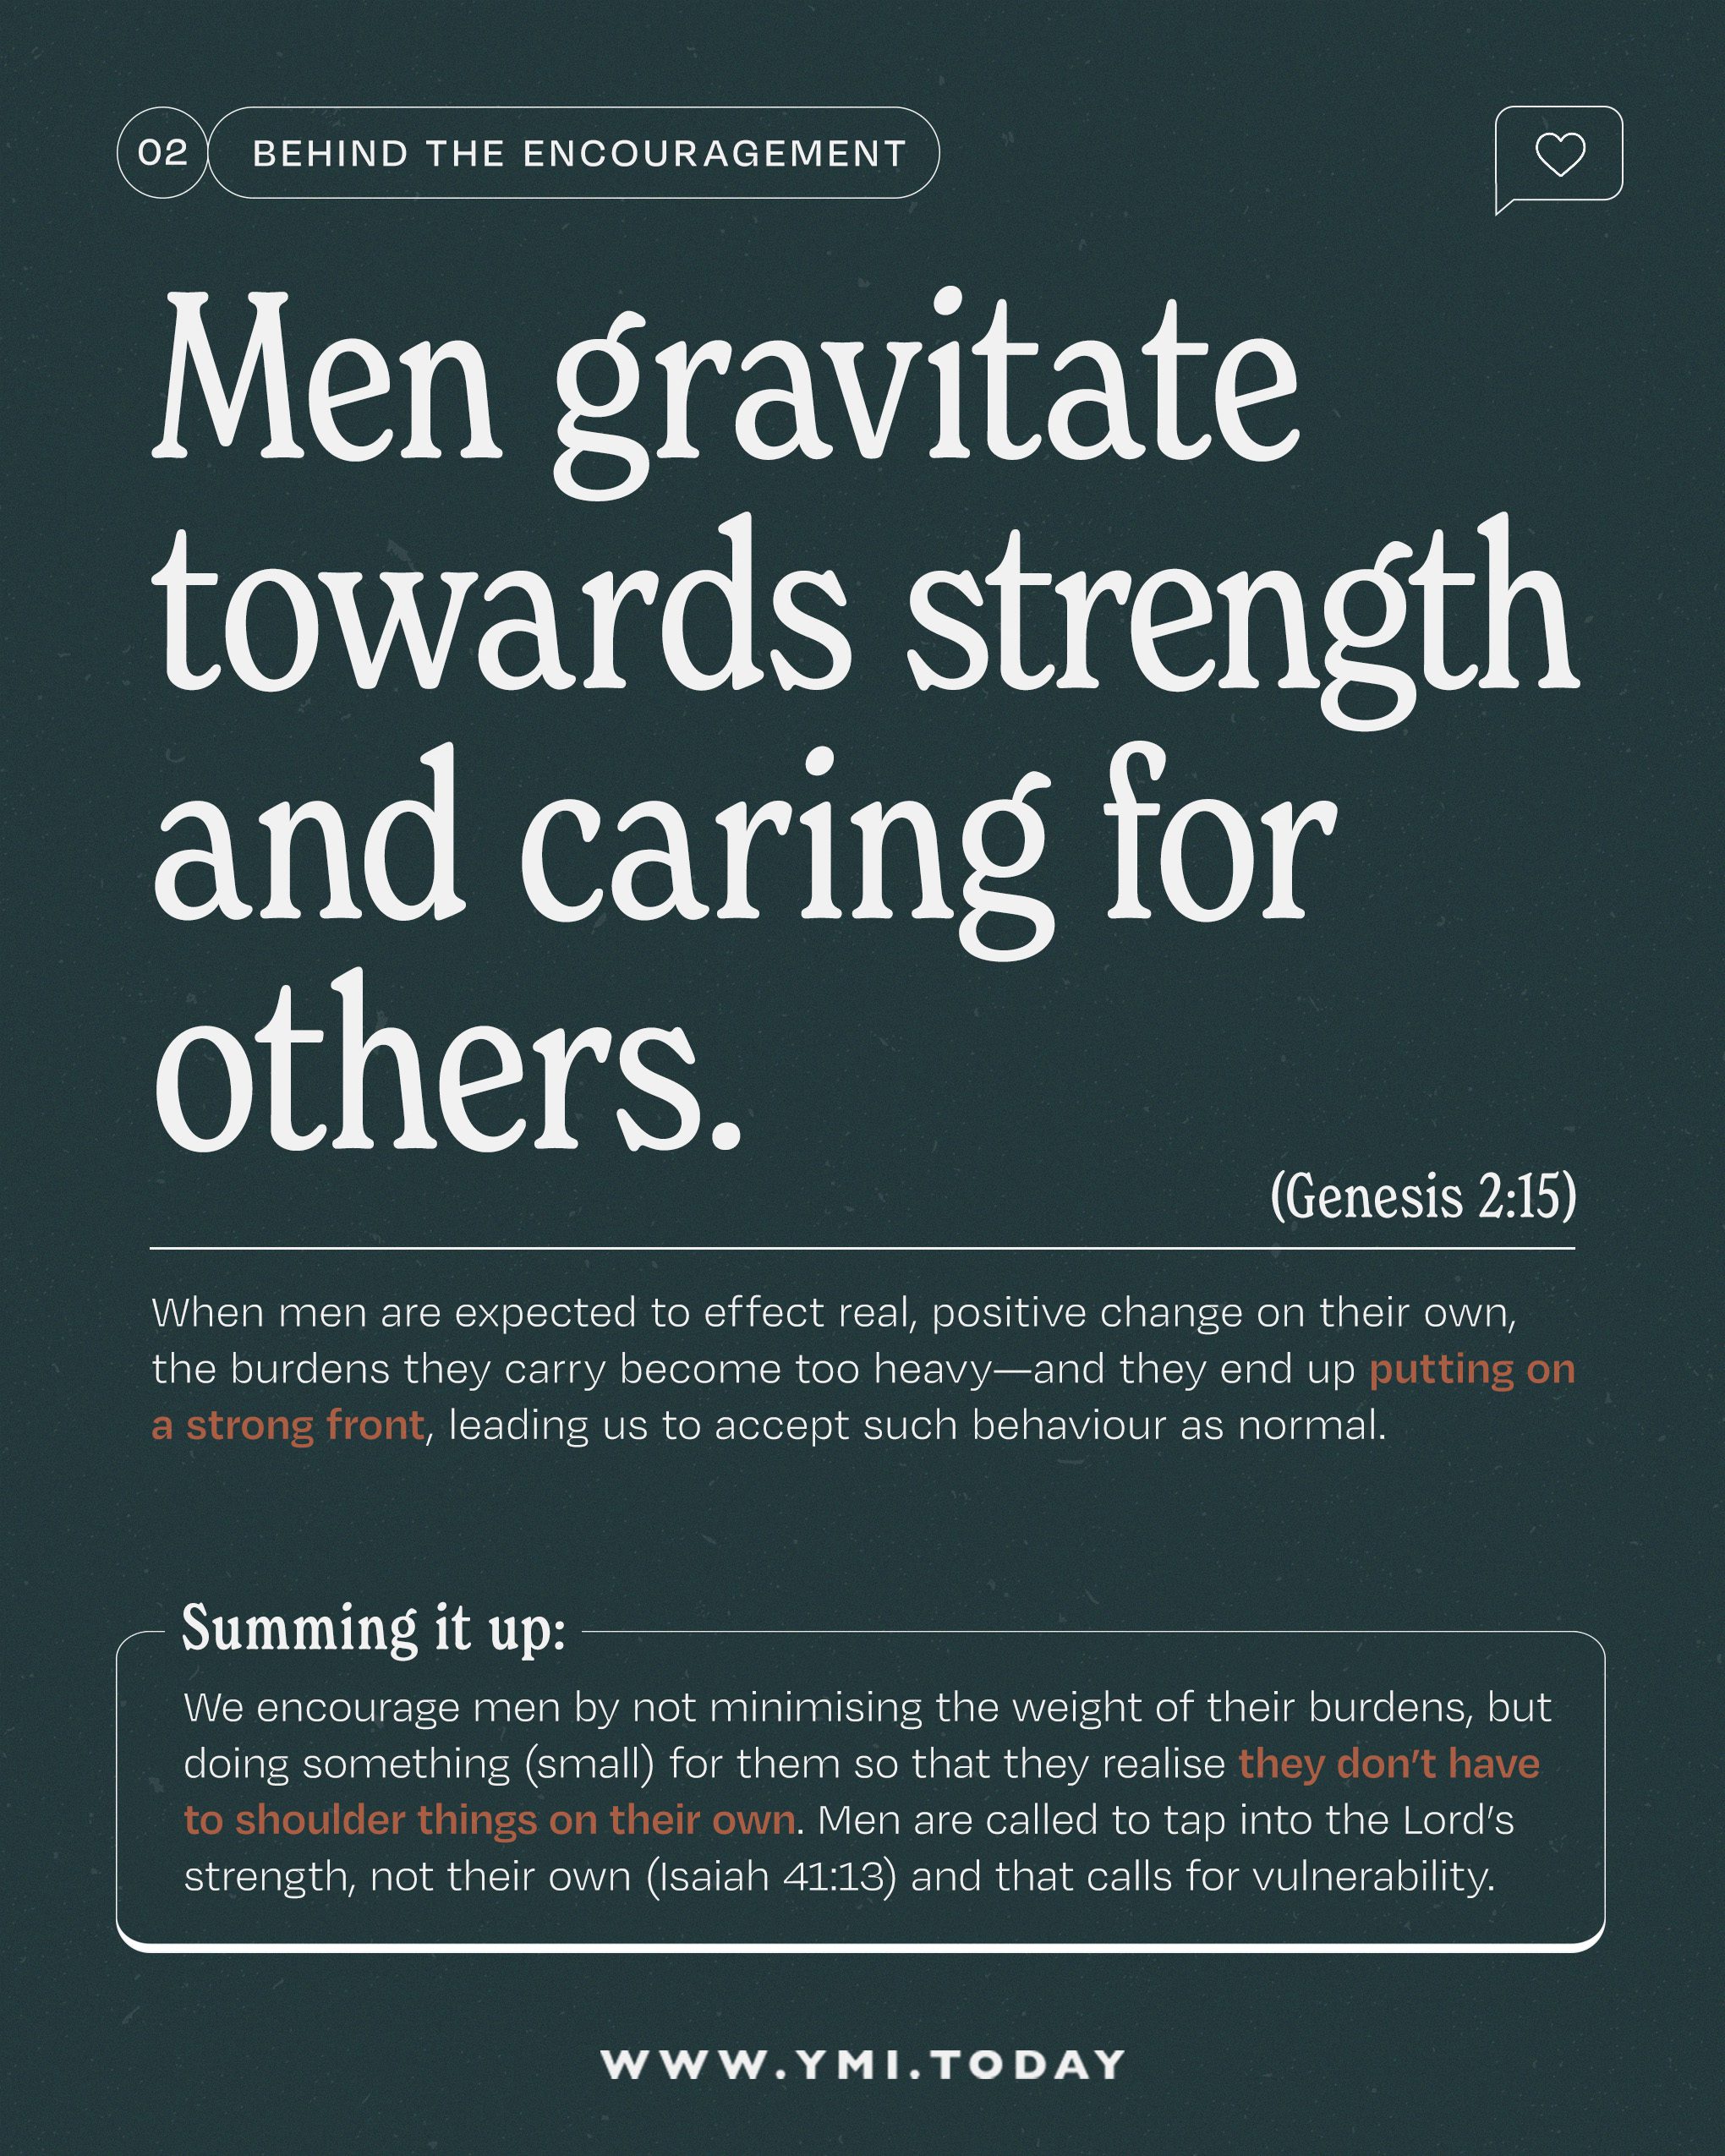 Men gravitate towards strength and caring for others.